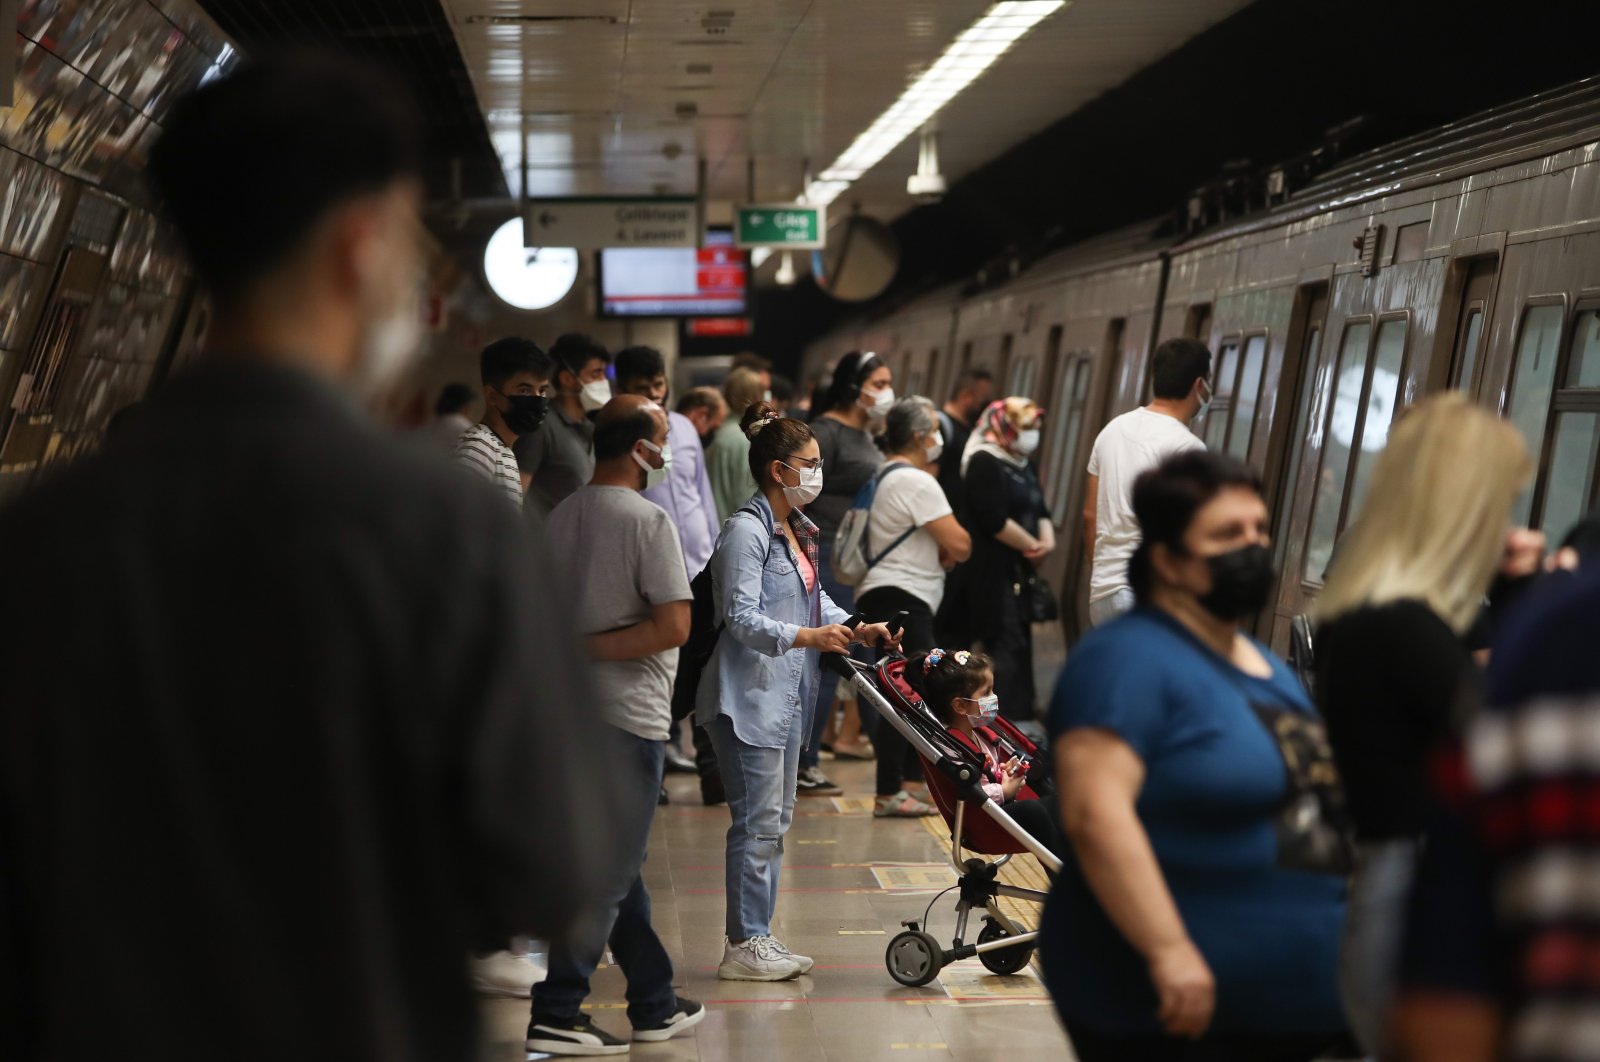 People can be seen abiding by mask rules at a metro station, in Istanbul, Turkey, Sept. 15, 2021. (DHA Photo)